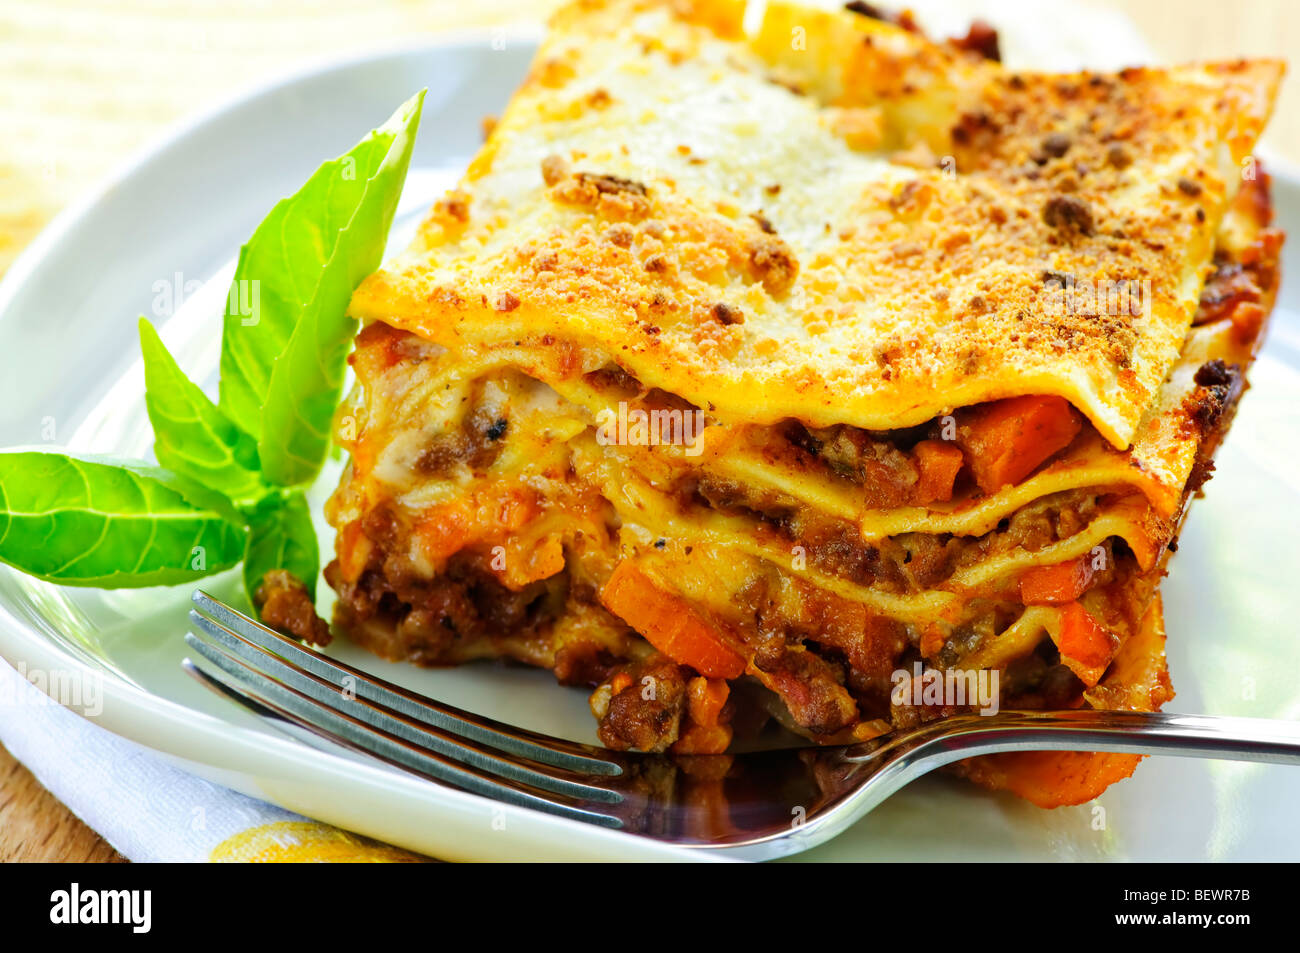 Serving of fresh baked lasagna on a plate Stock Photo - Alamy